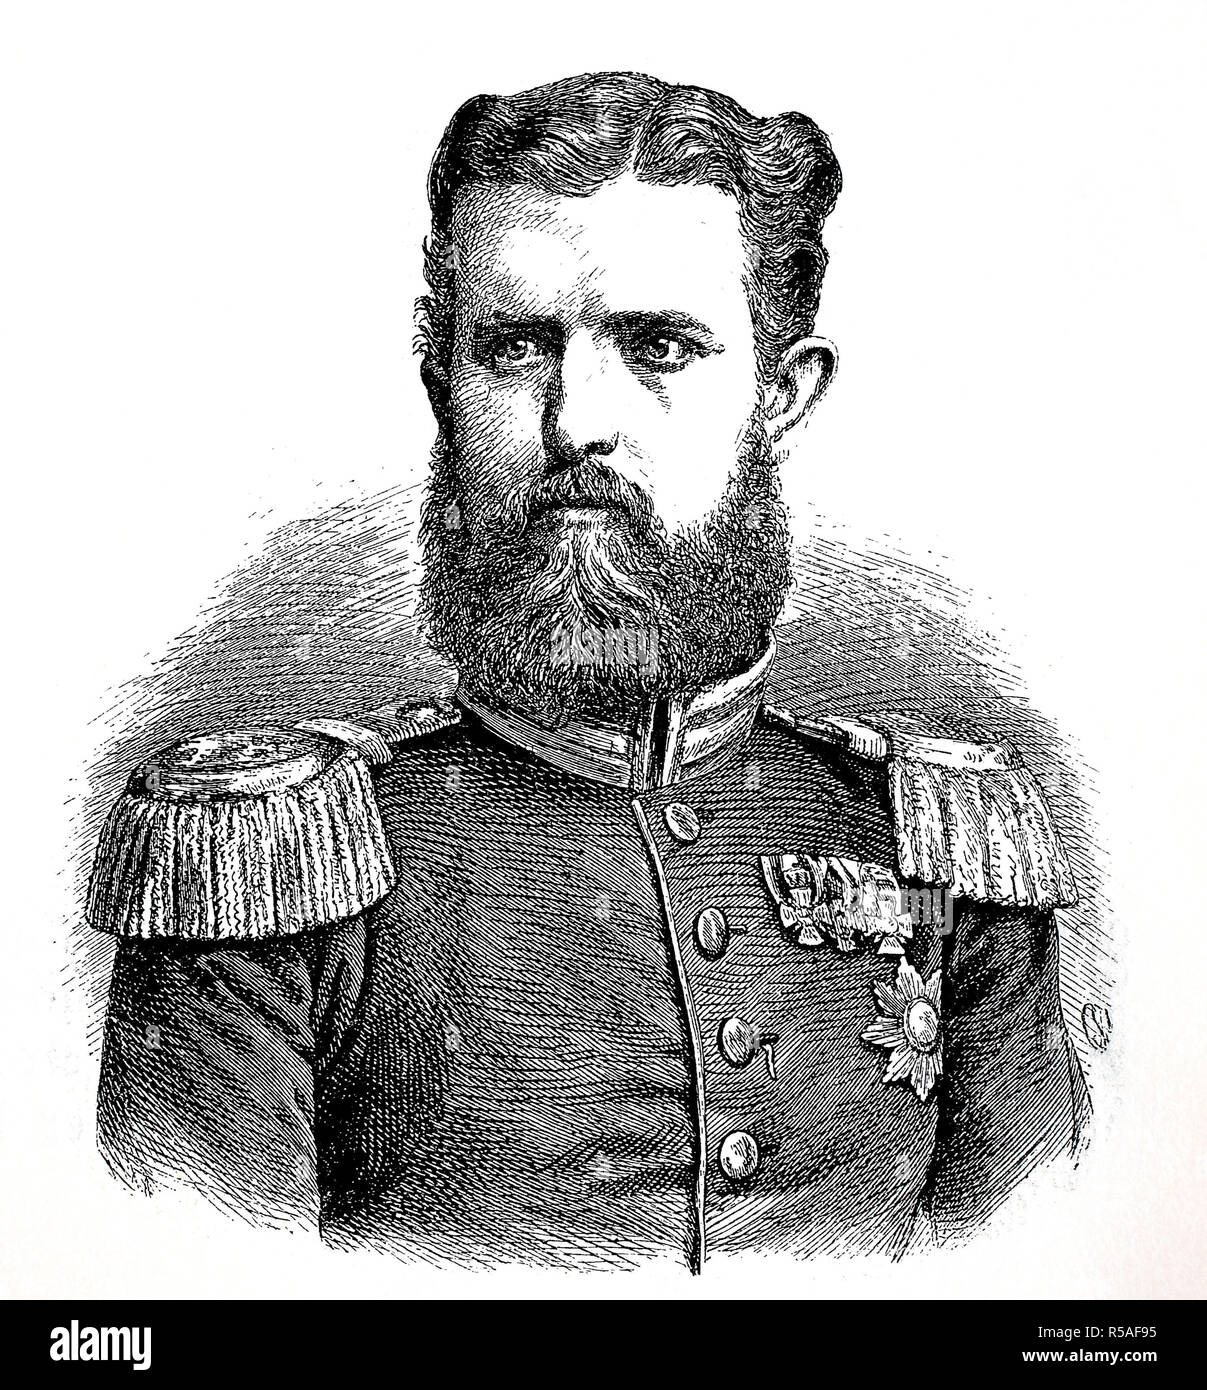 Leopold, Prince of Hohenzollern, 22 September 1835, 8 June 1905, woodcut, germany Stock Photo